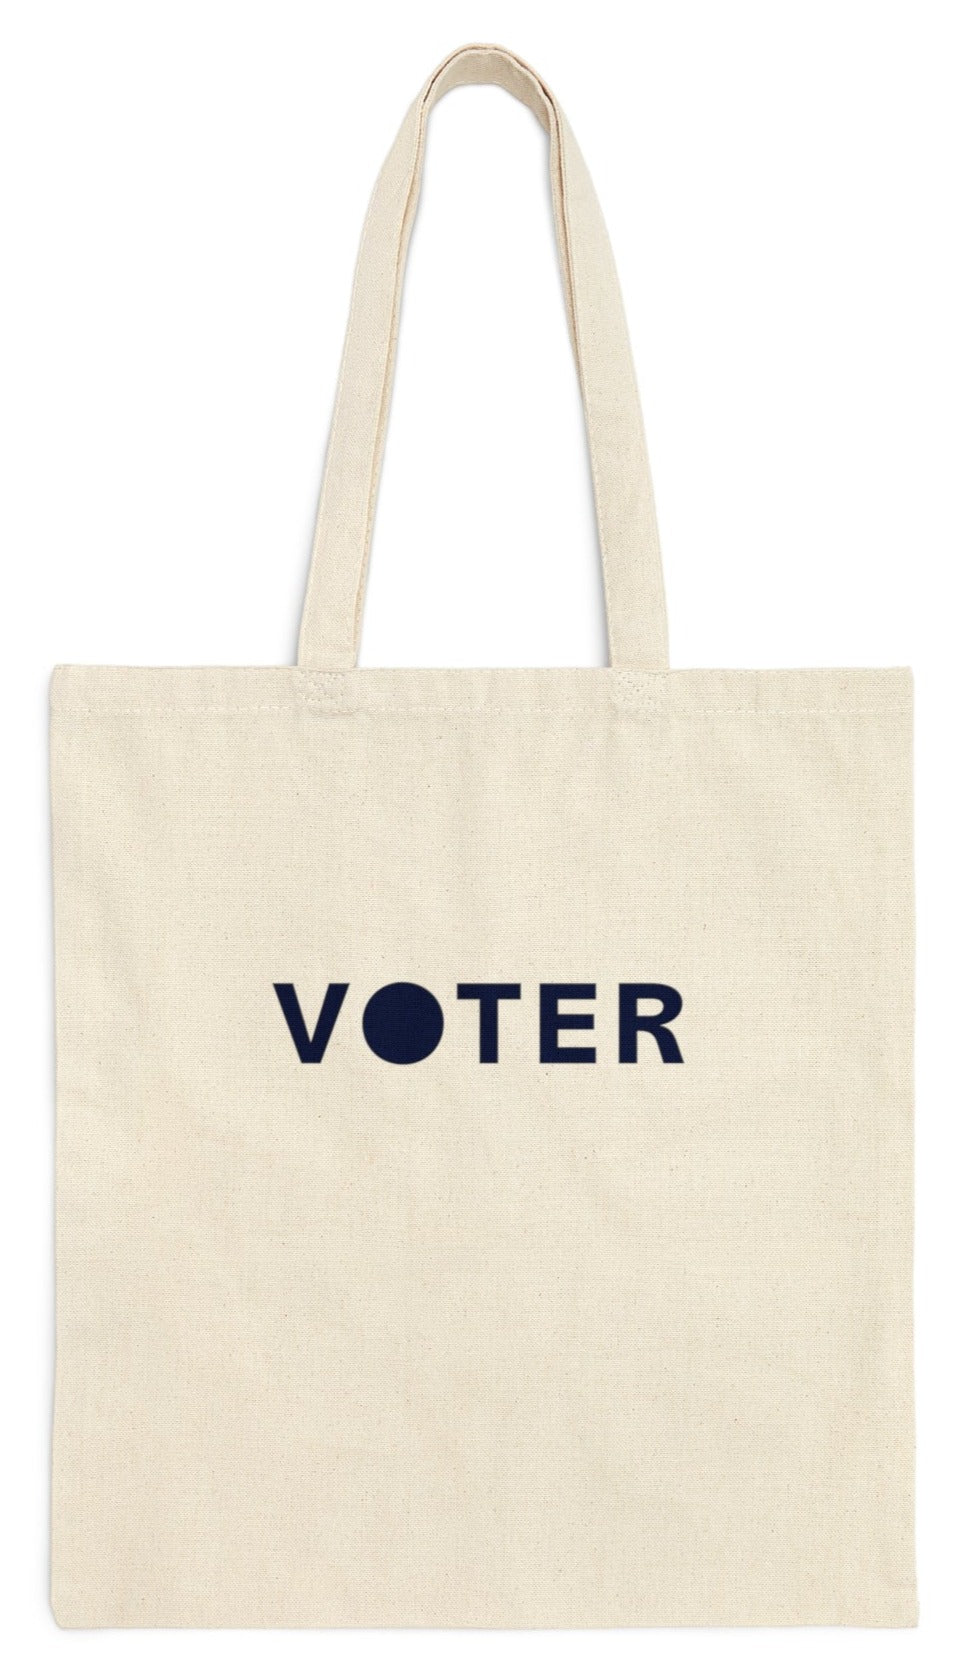 Voter - Canvas Tote Bag